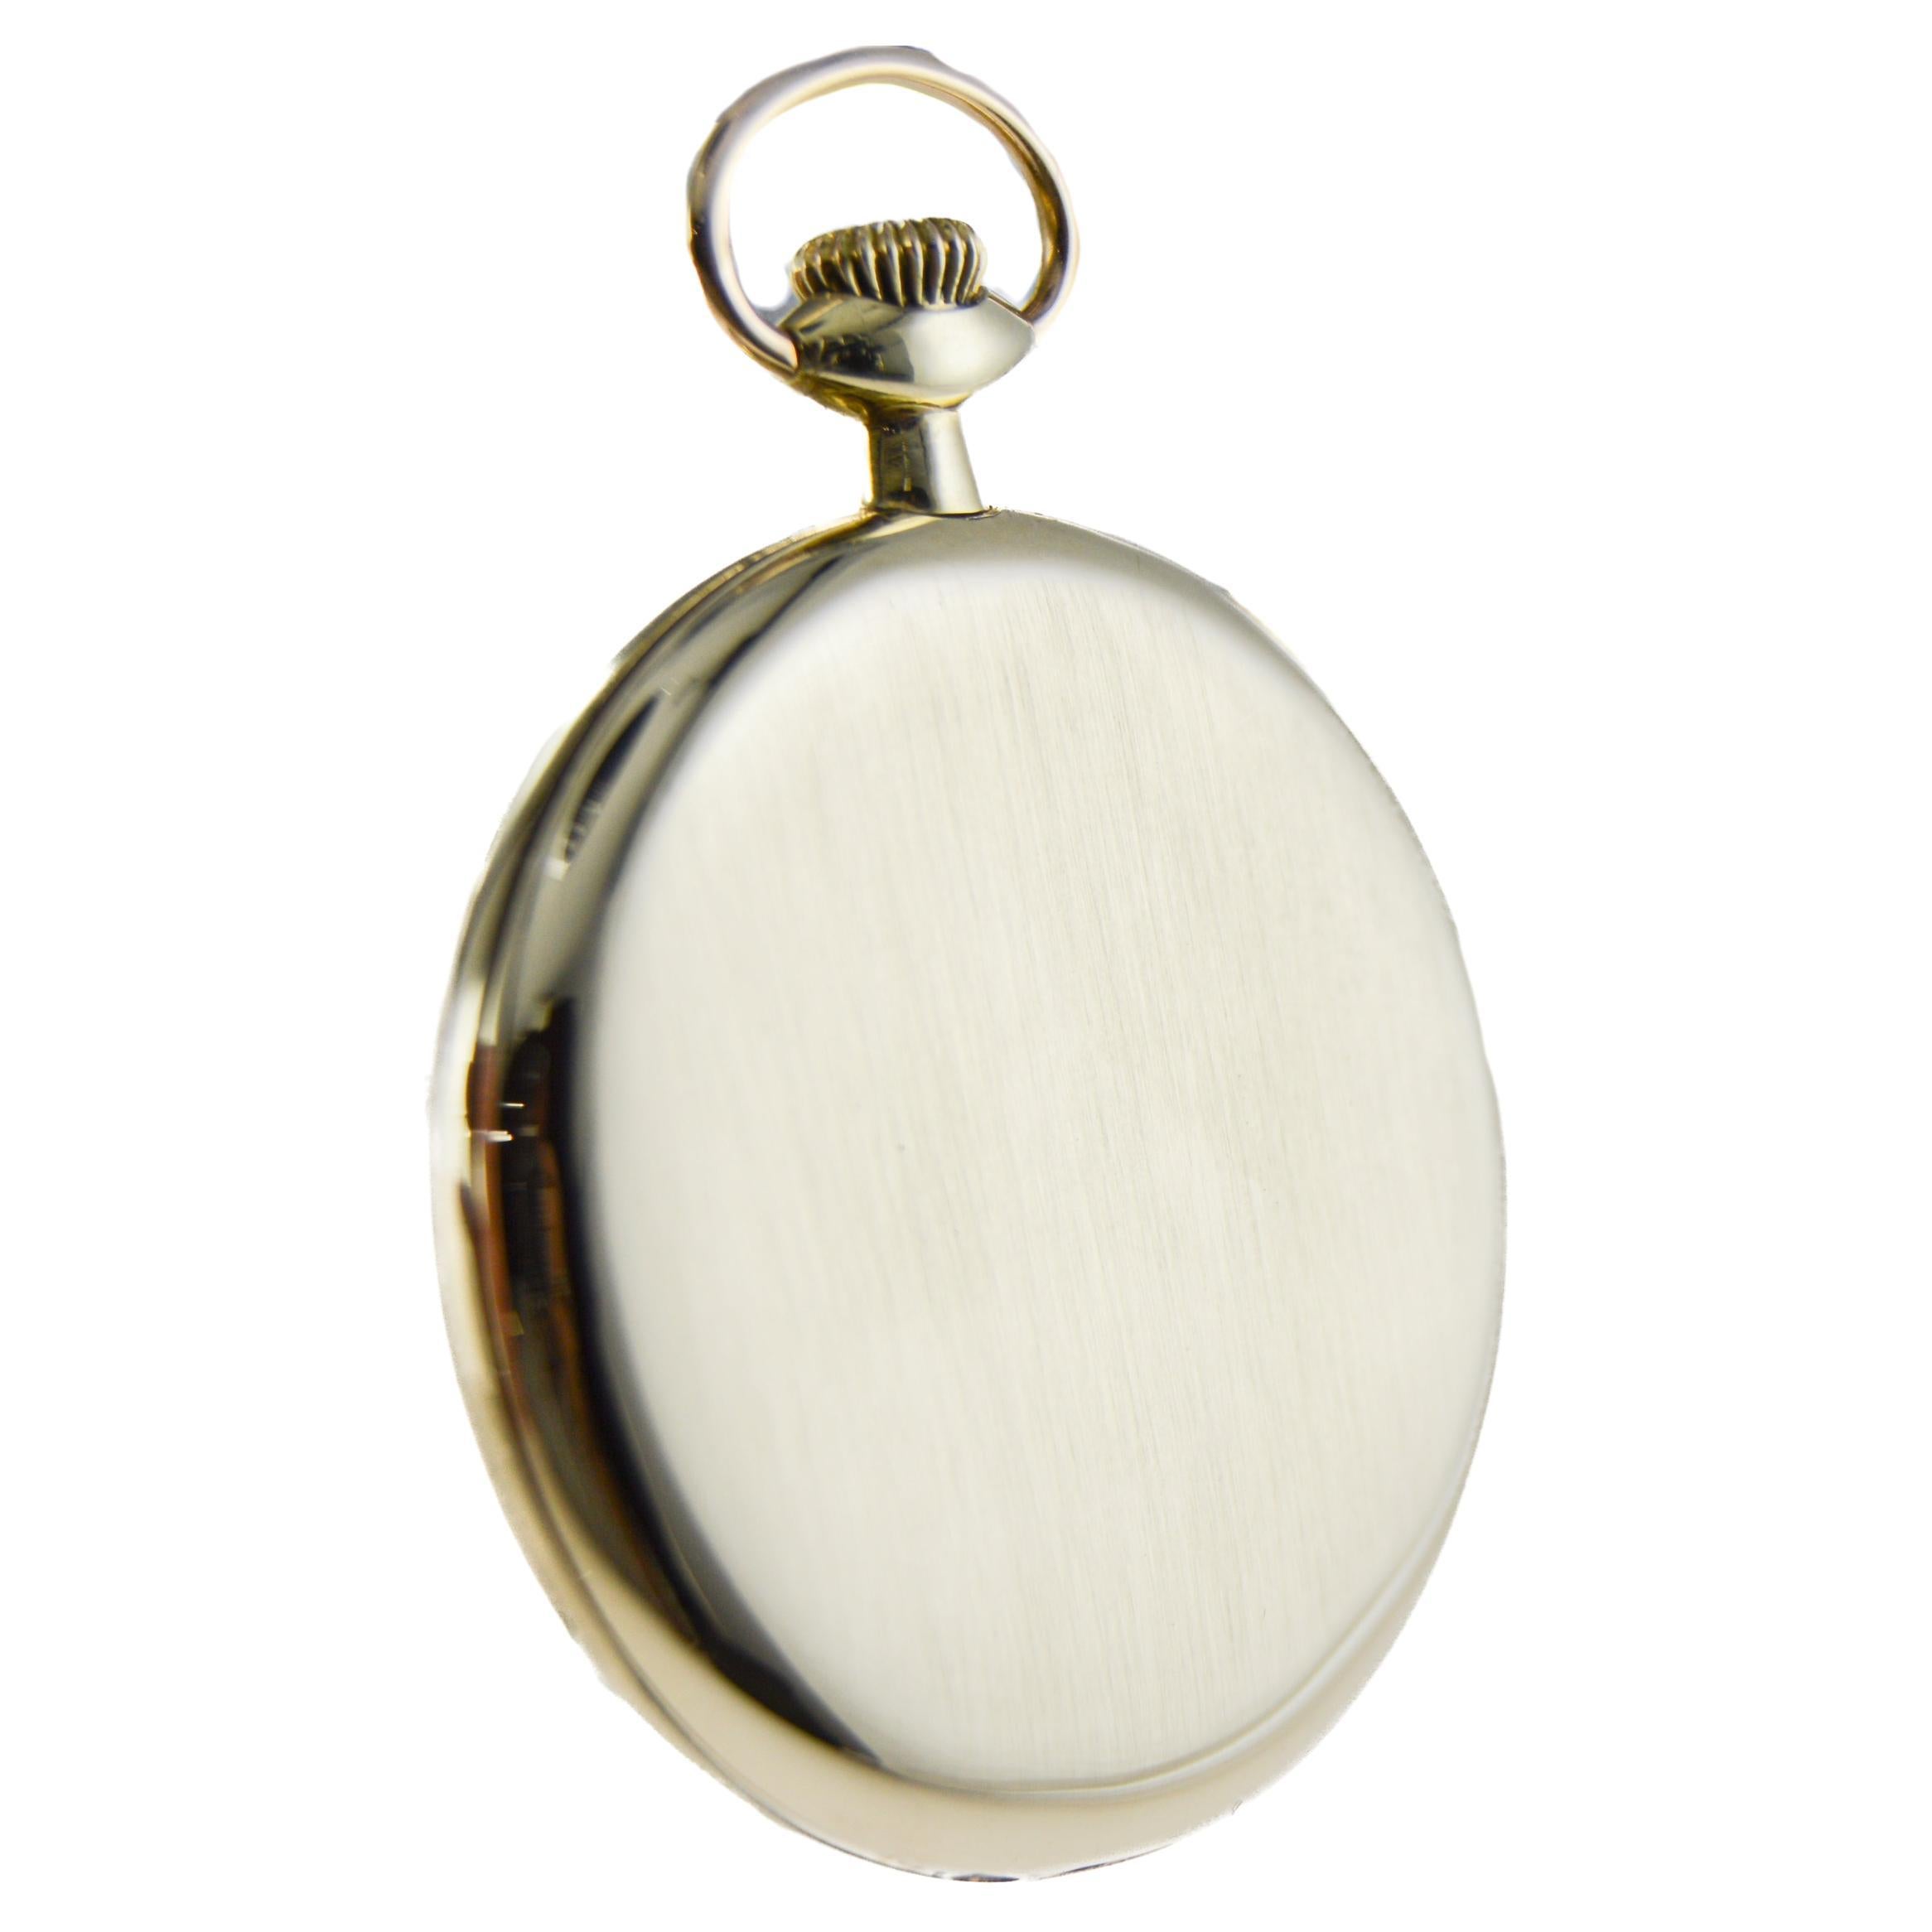 Gruen  Solid Yellow Gold Pocket Watch with Original Dial by Stern Freres 1920's For Sale 3